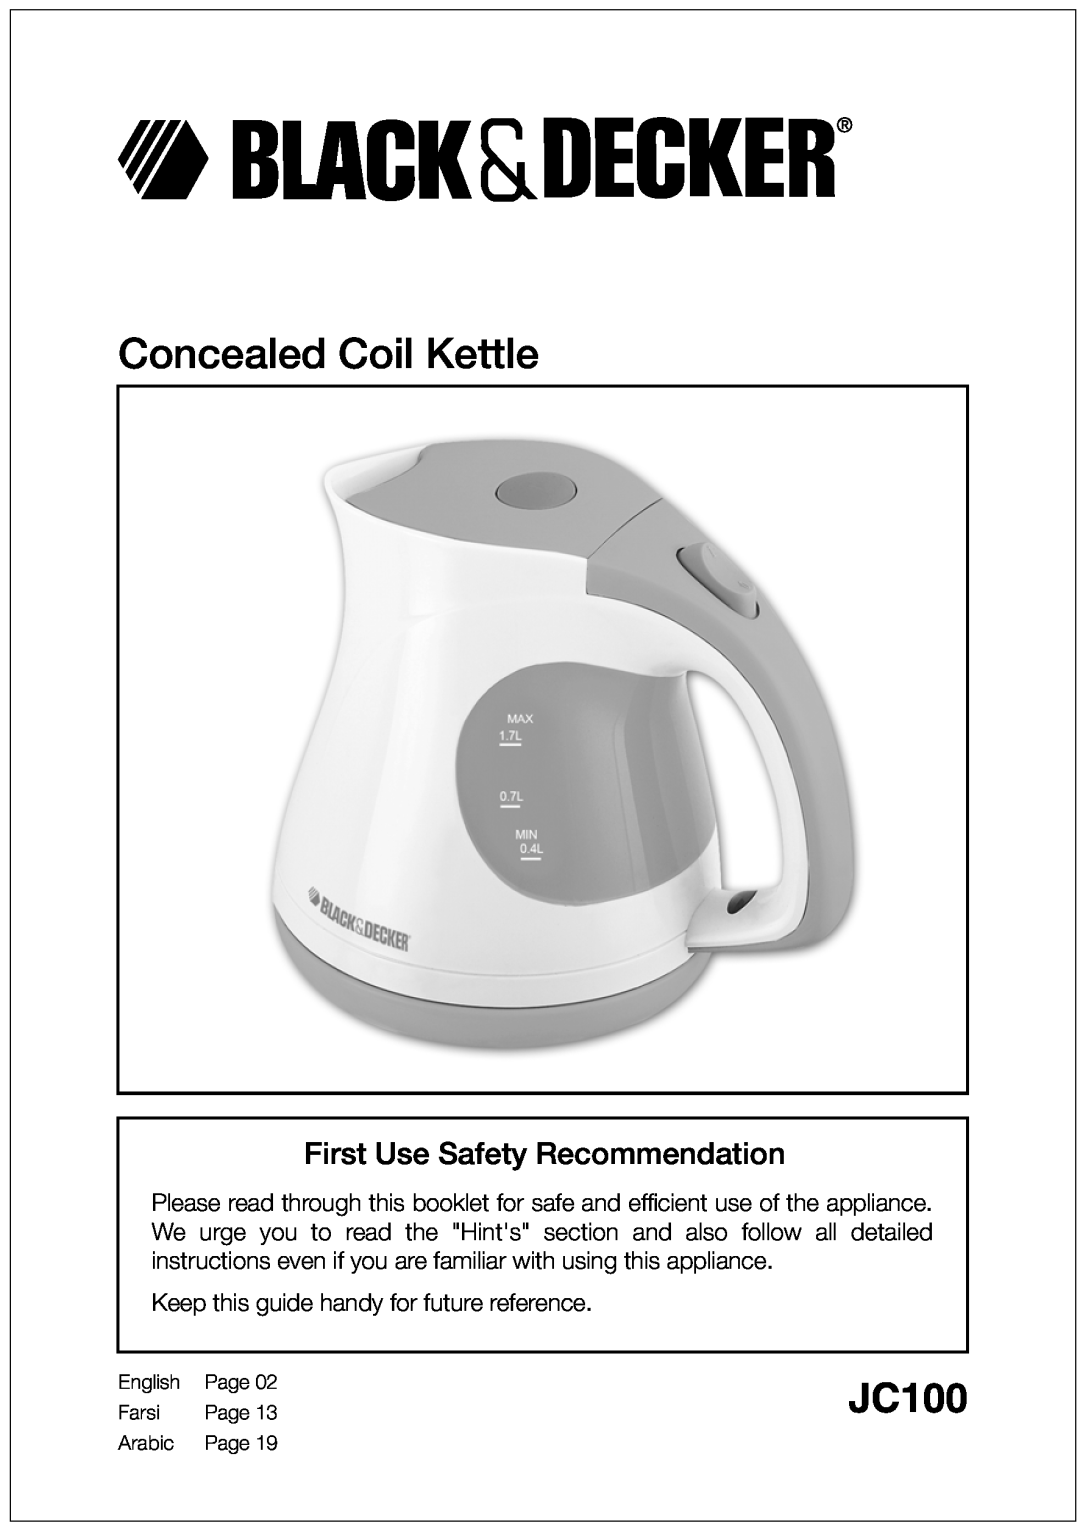 Black & Decker JC100 manual Concealed Coil Kettle, First Use Safety Recommendation, English, Page, Farsi, Arabic 